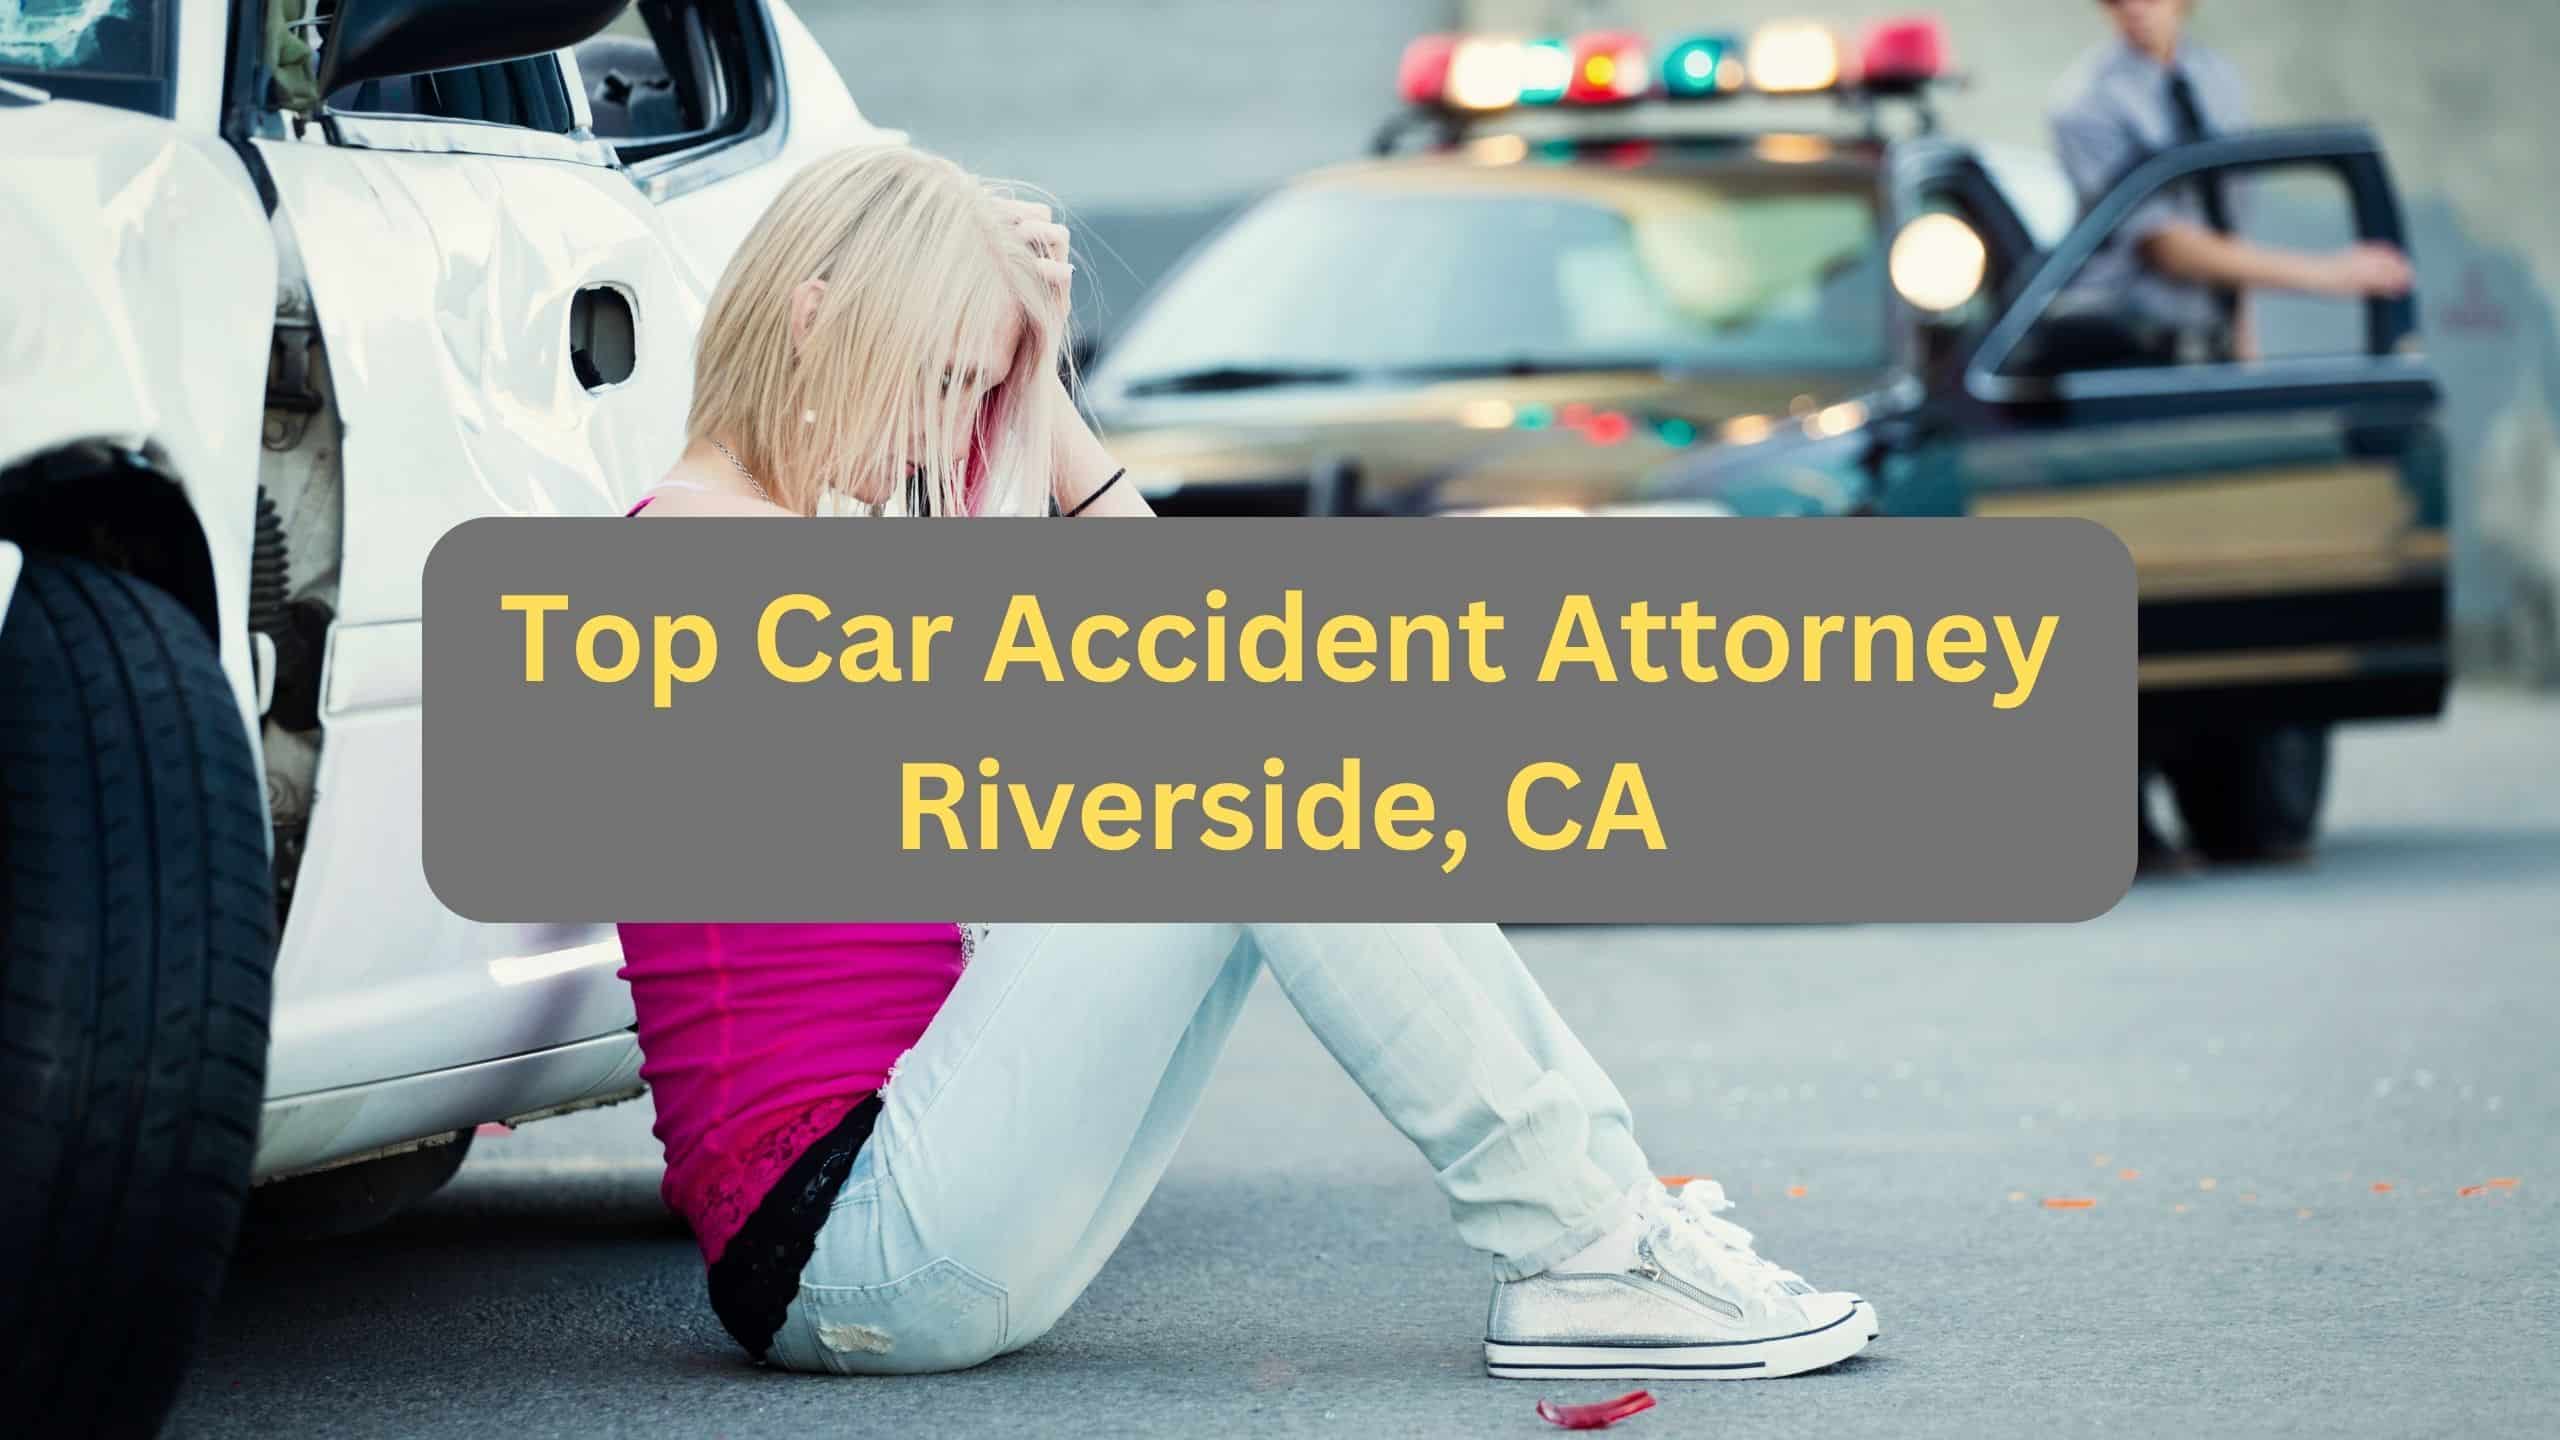 Top Car Accident Attorney Riverside